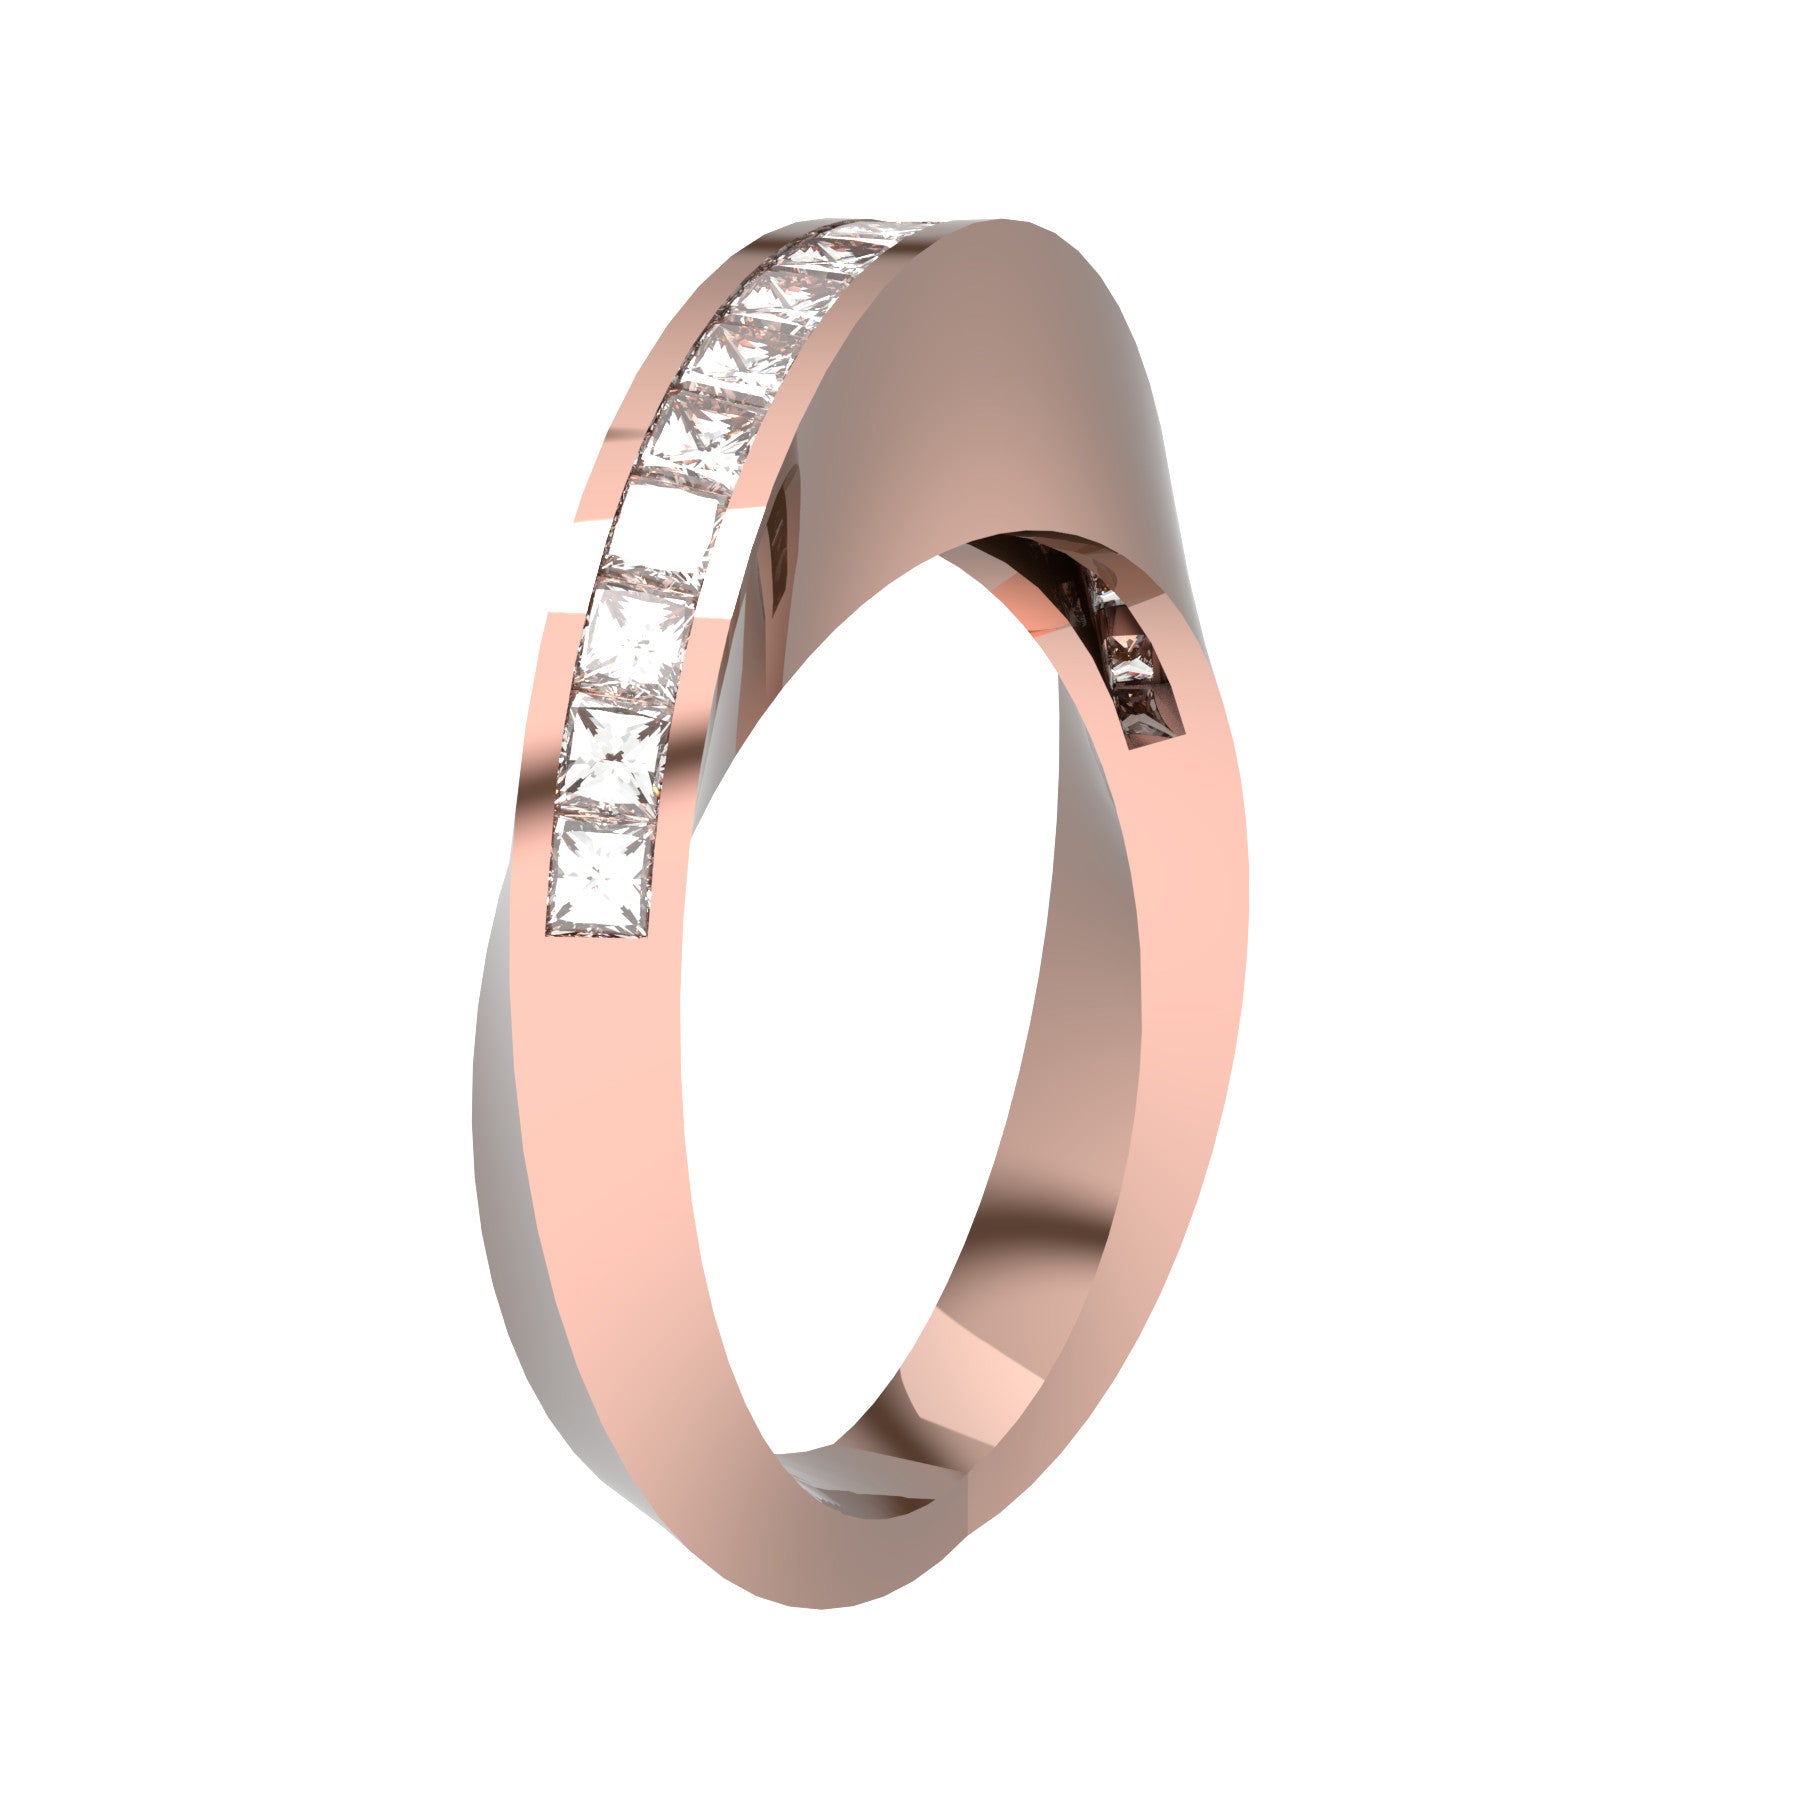 crazy ribbon ring, 18 K pink gold, 18 square natural diamonds, about 0,90 ct, weight about 8,5 g (0.30 oz) width 3 mm